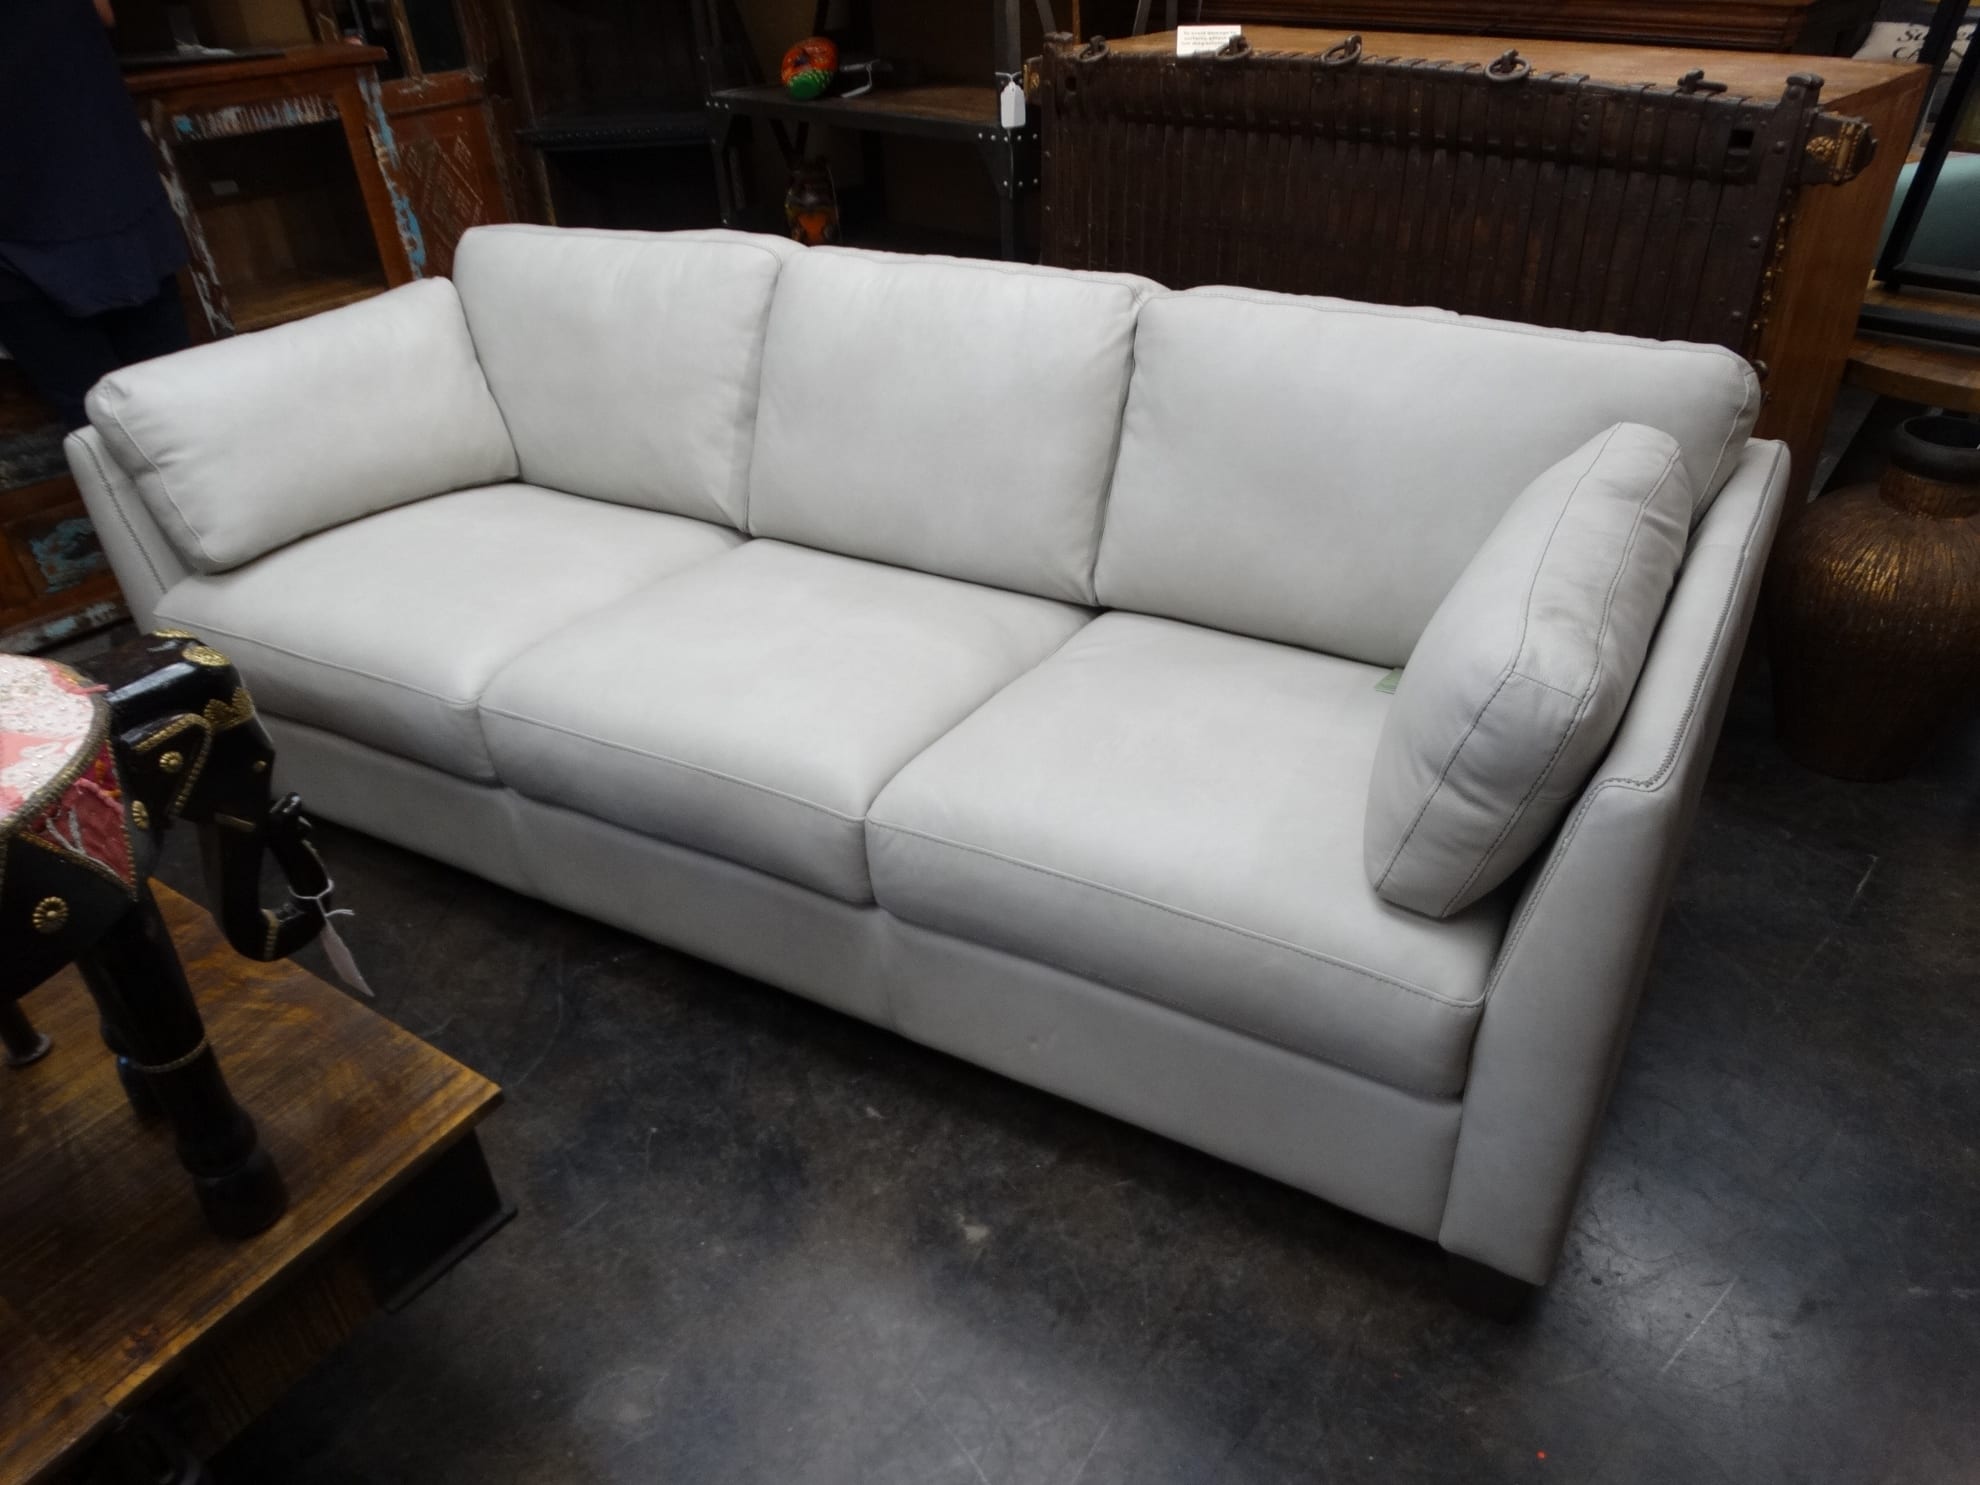 This Leather Chair Is Roomy And Has A, Soft Leather Couch